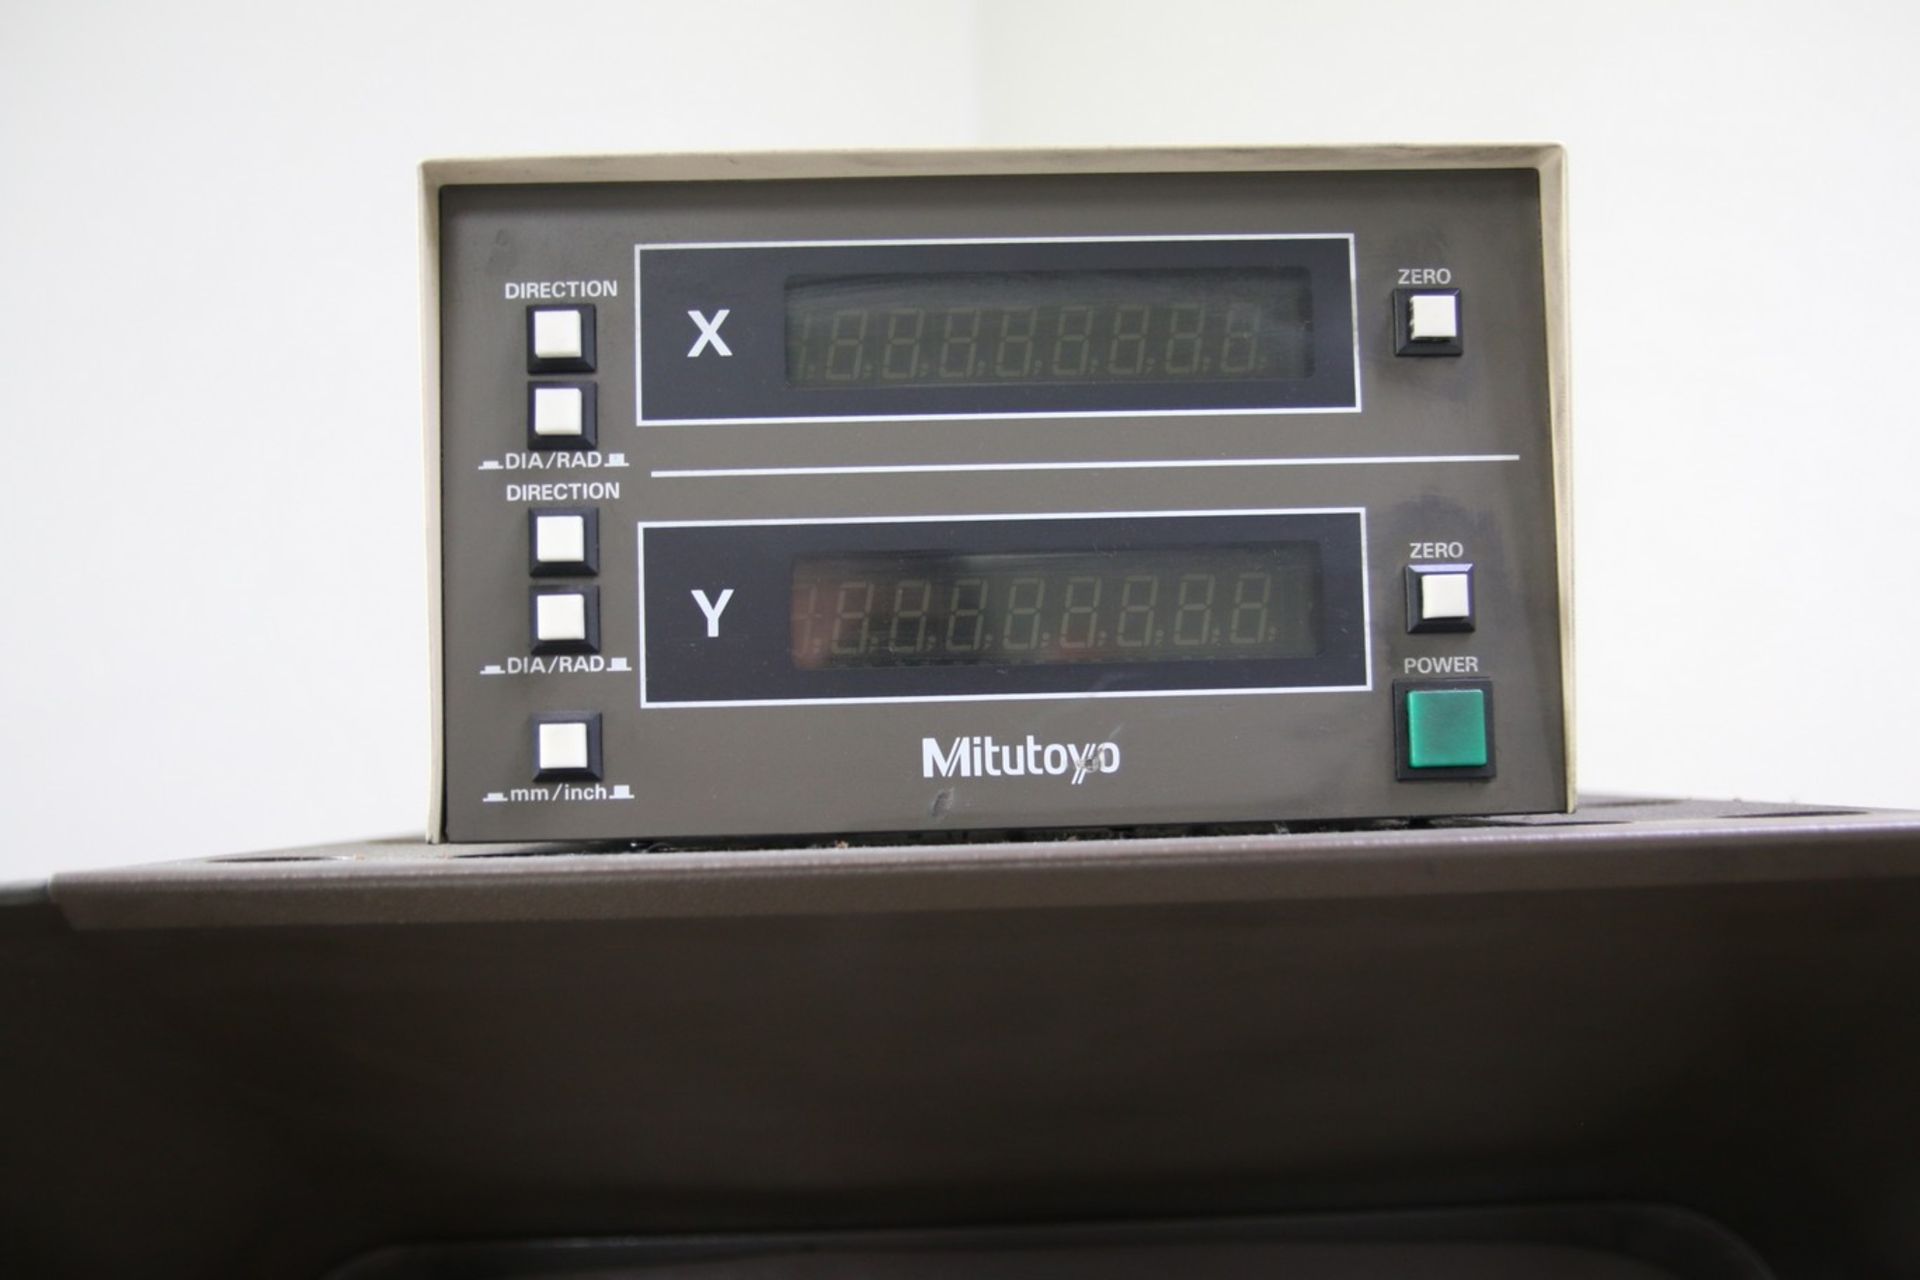 Mitutoyo PH350 Mitutoyo PH350 Profile Projector Linear Scales, 10x Lens, X-Y Digital Readout - Image 4 of 7